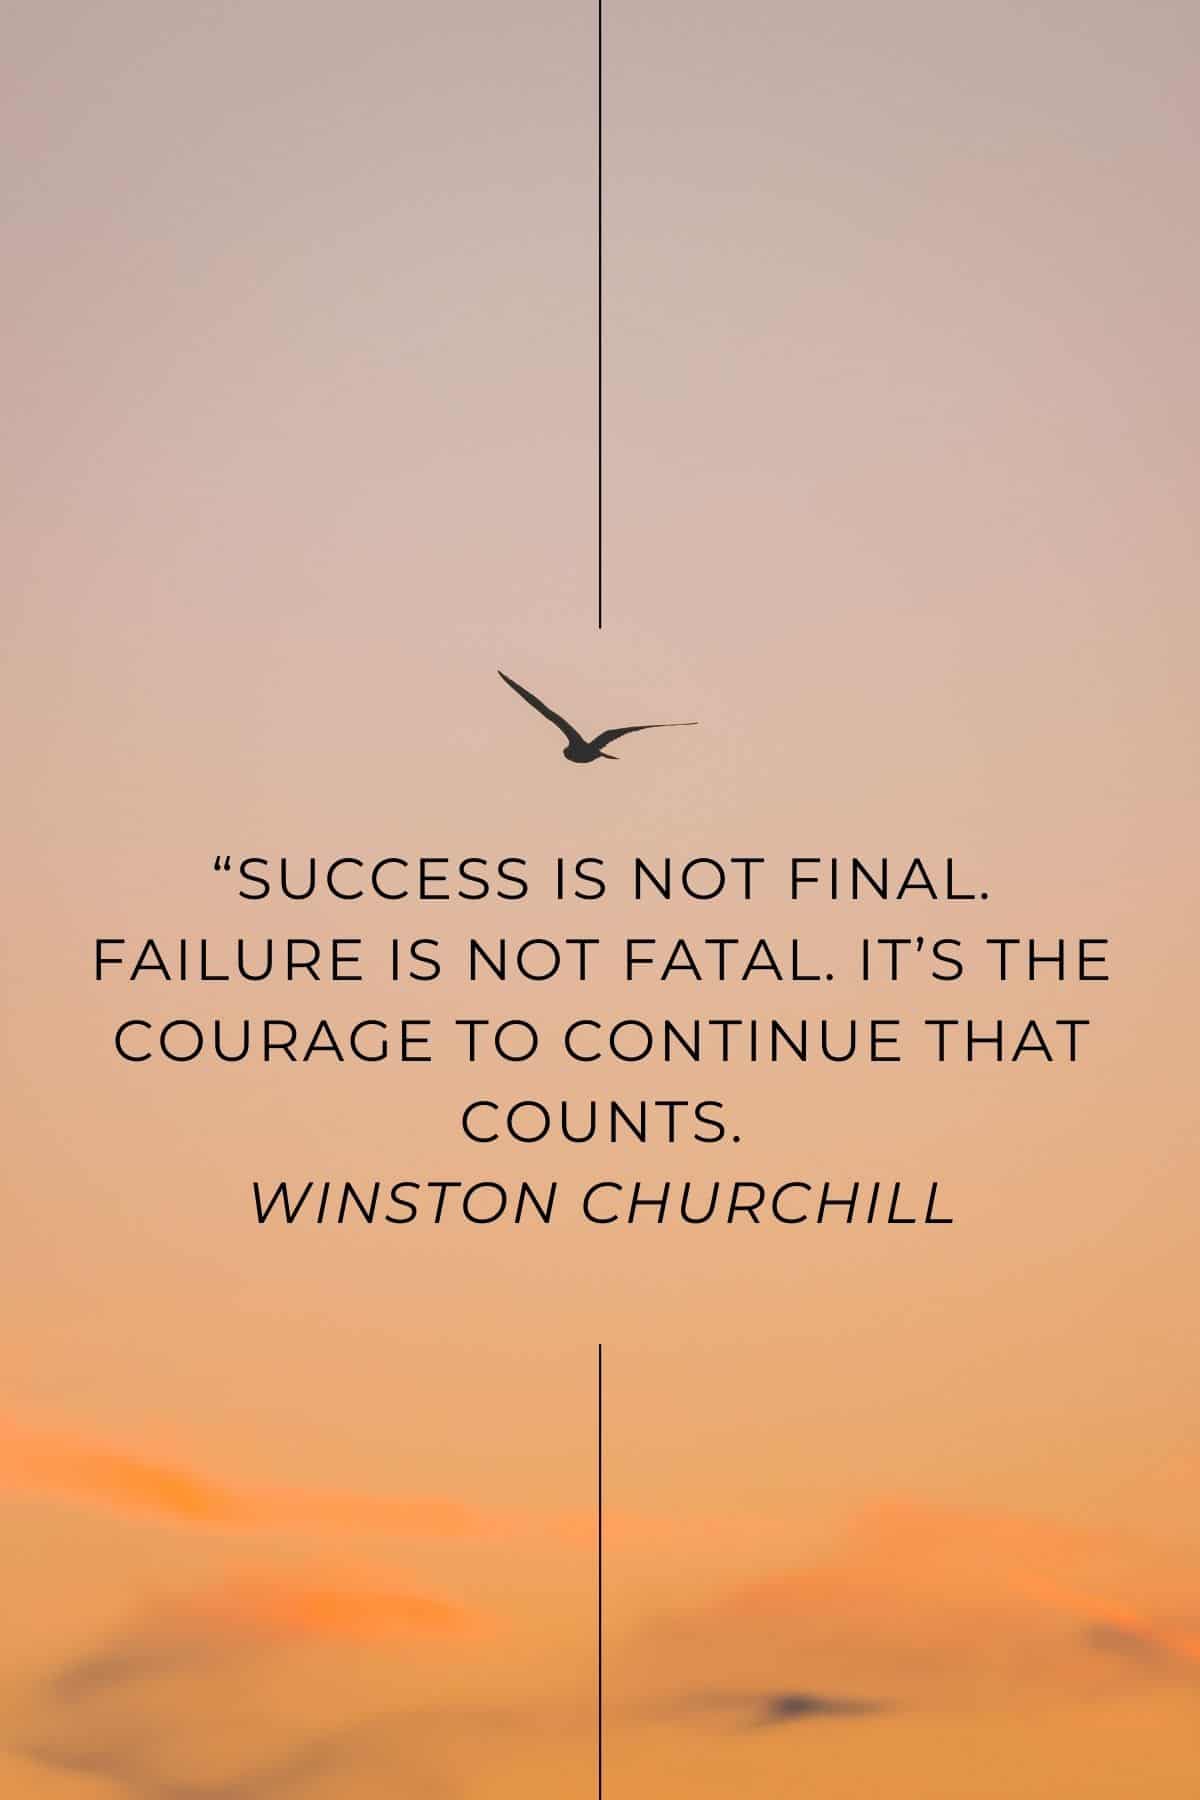 picture of a sunset with a bird flying - with the text overlay "“Success is not final. Failure is not fatal. It’s the courage to continue that counts.” —Winston Churchill"